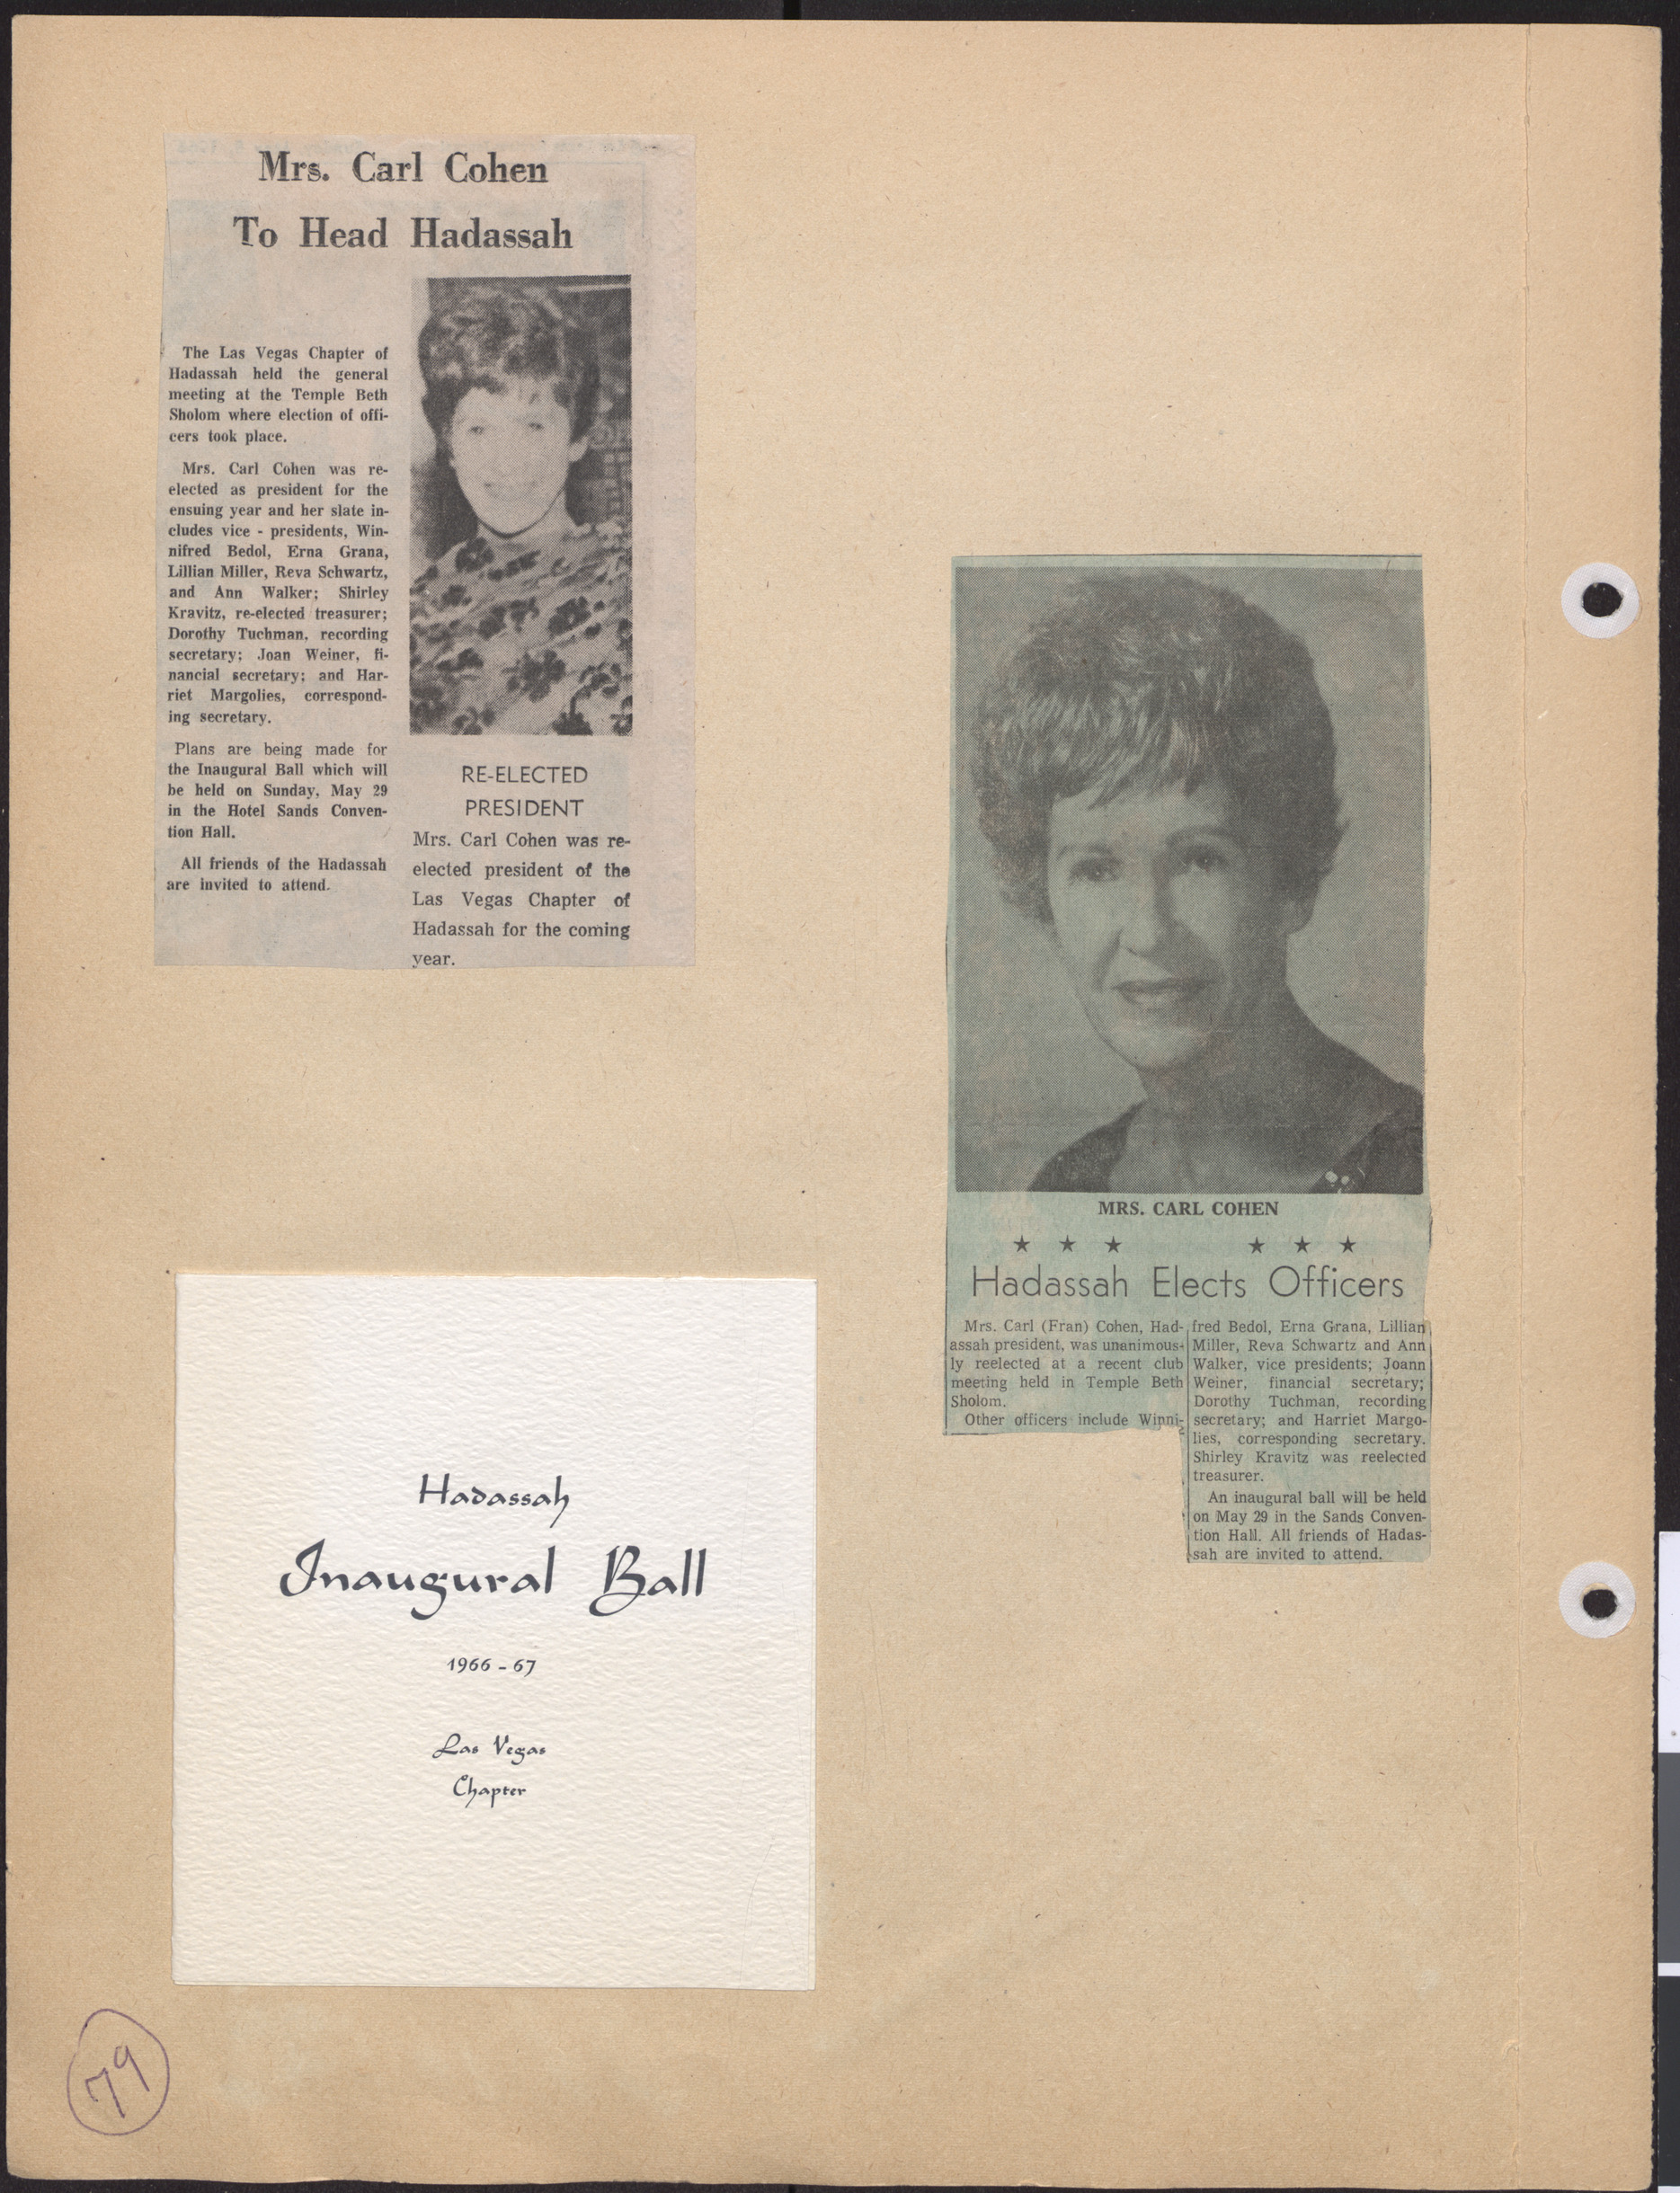 Newspaper clippings about Hadassah officer election and Inaugural Ball invitation, 1966